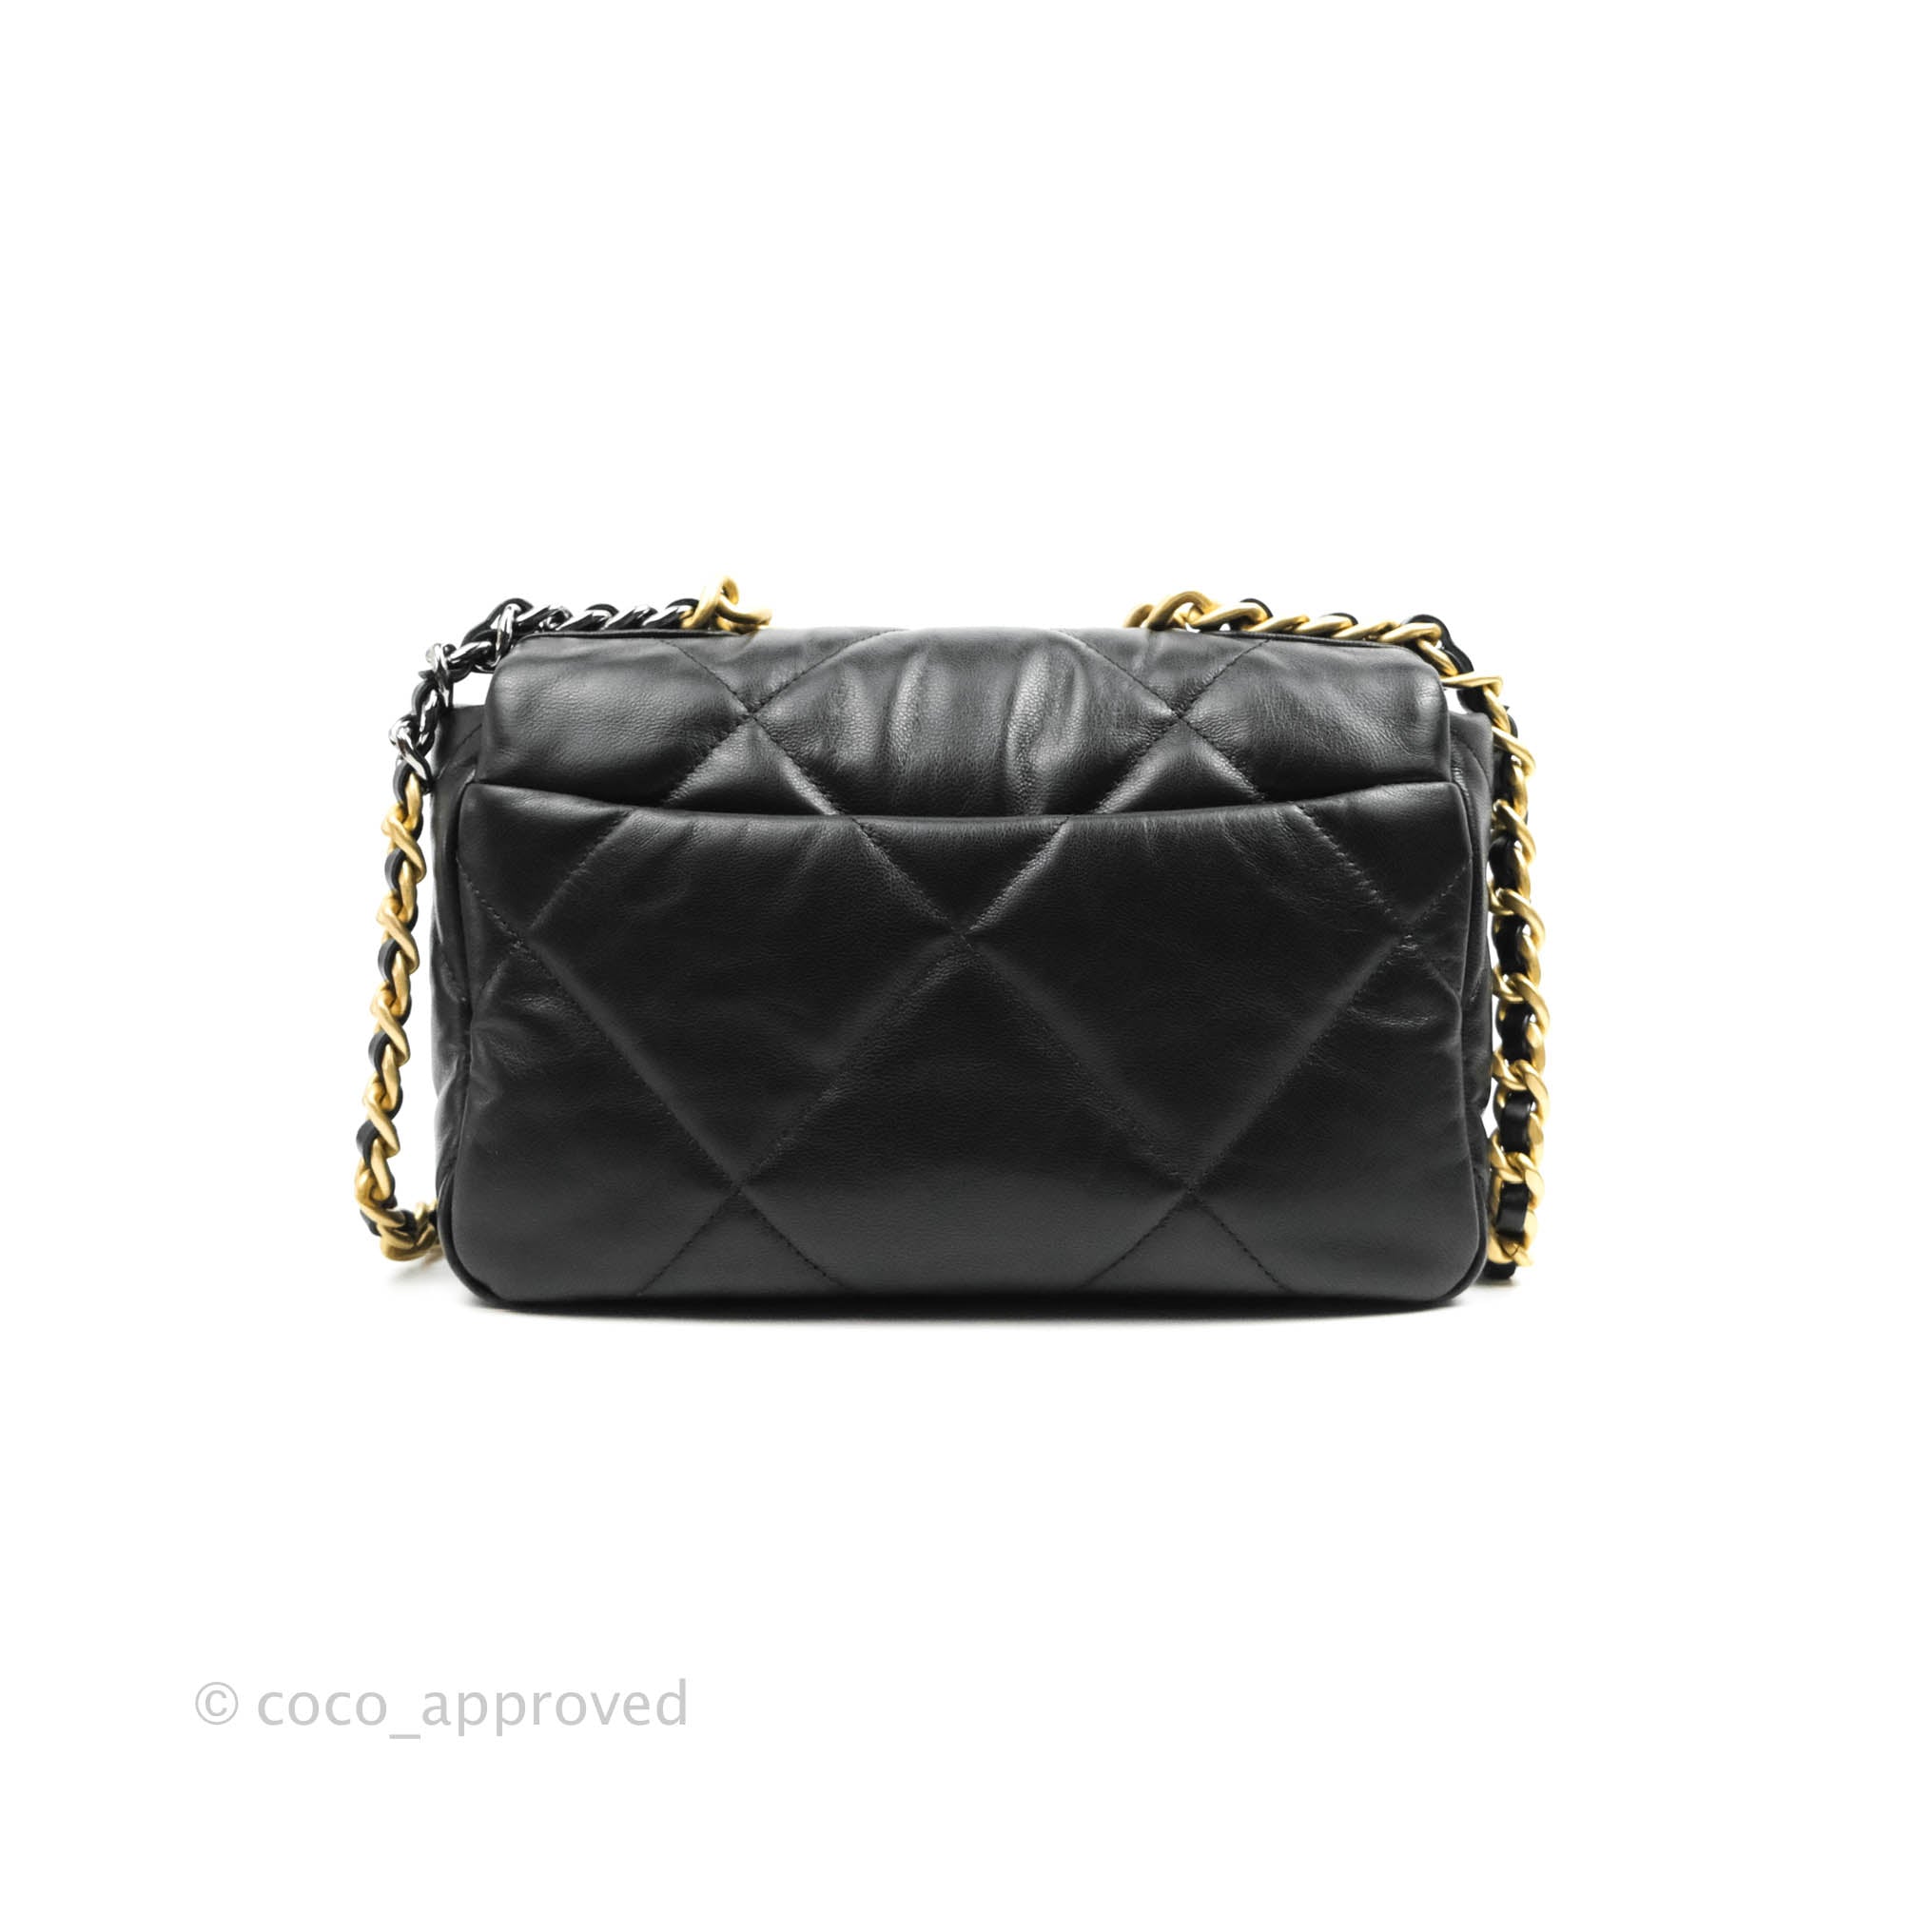 CHANEL 19 Small Flap Quilted Lambskin Leather Shoulder Bag Black - Fin